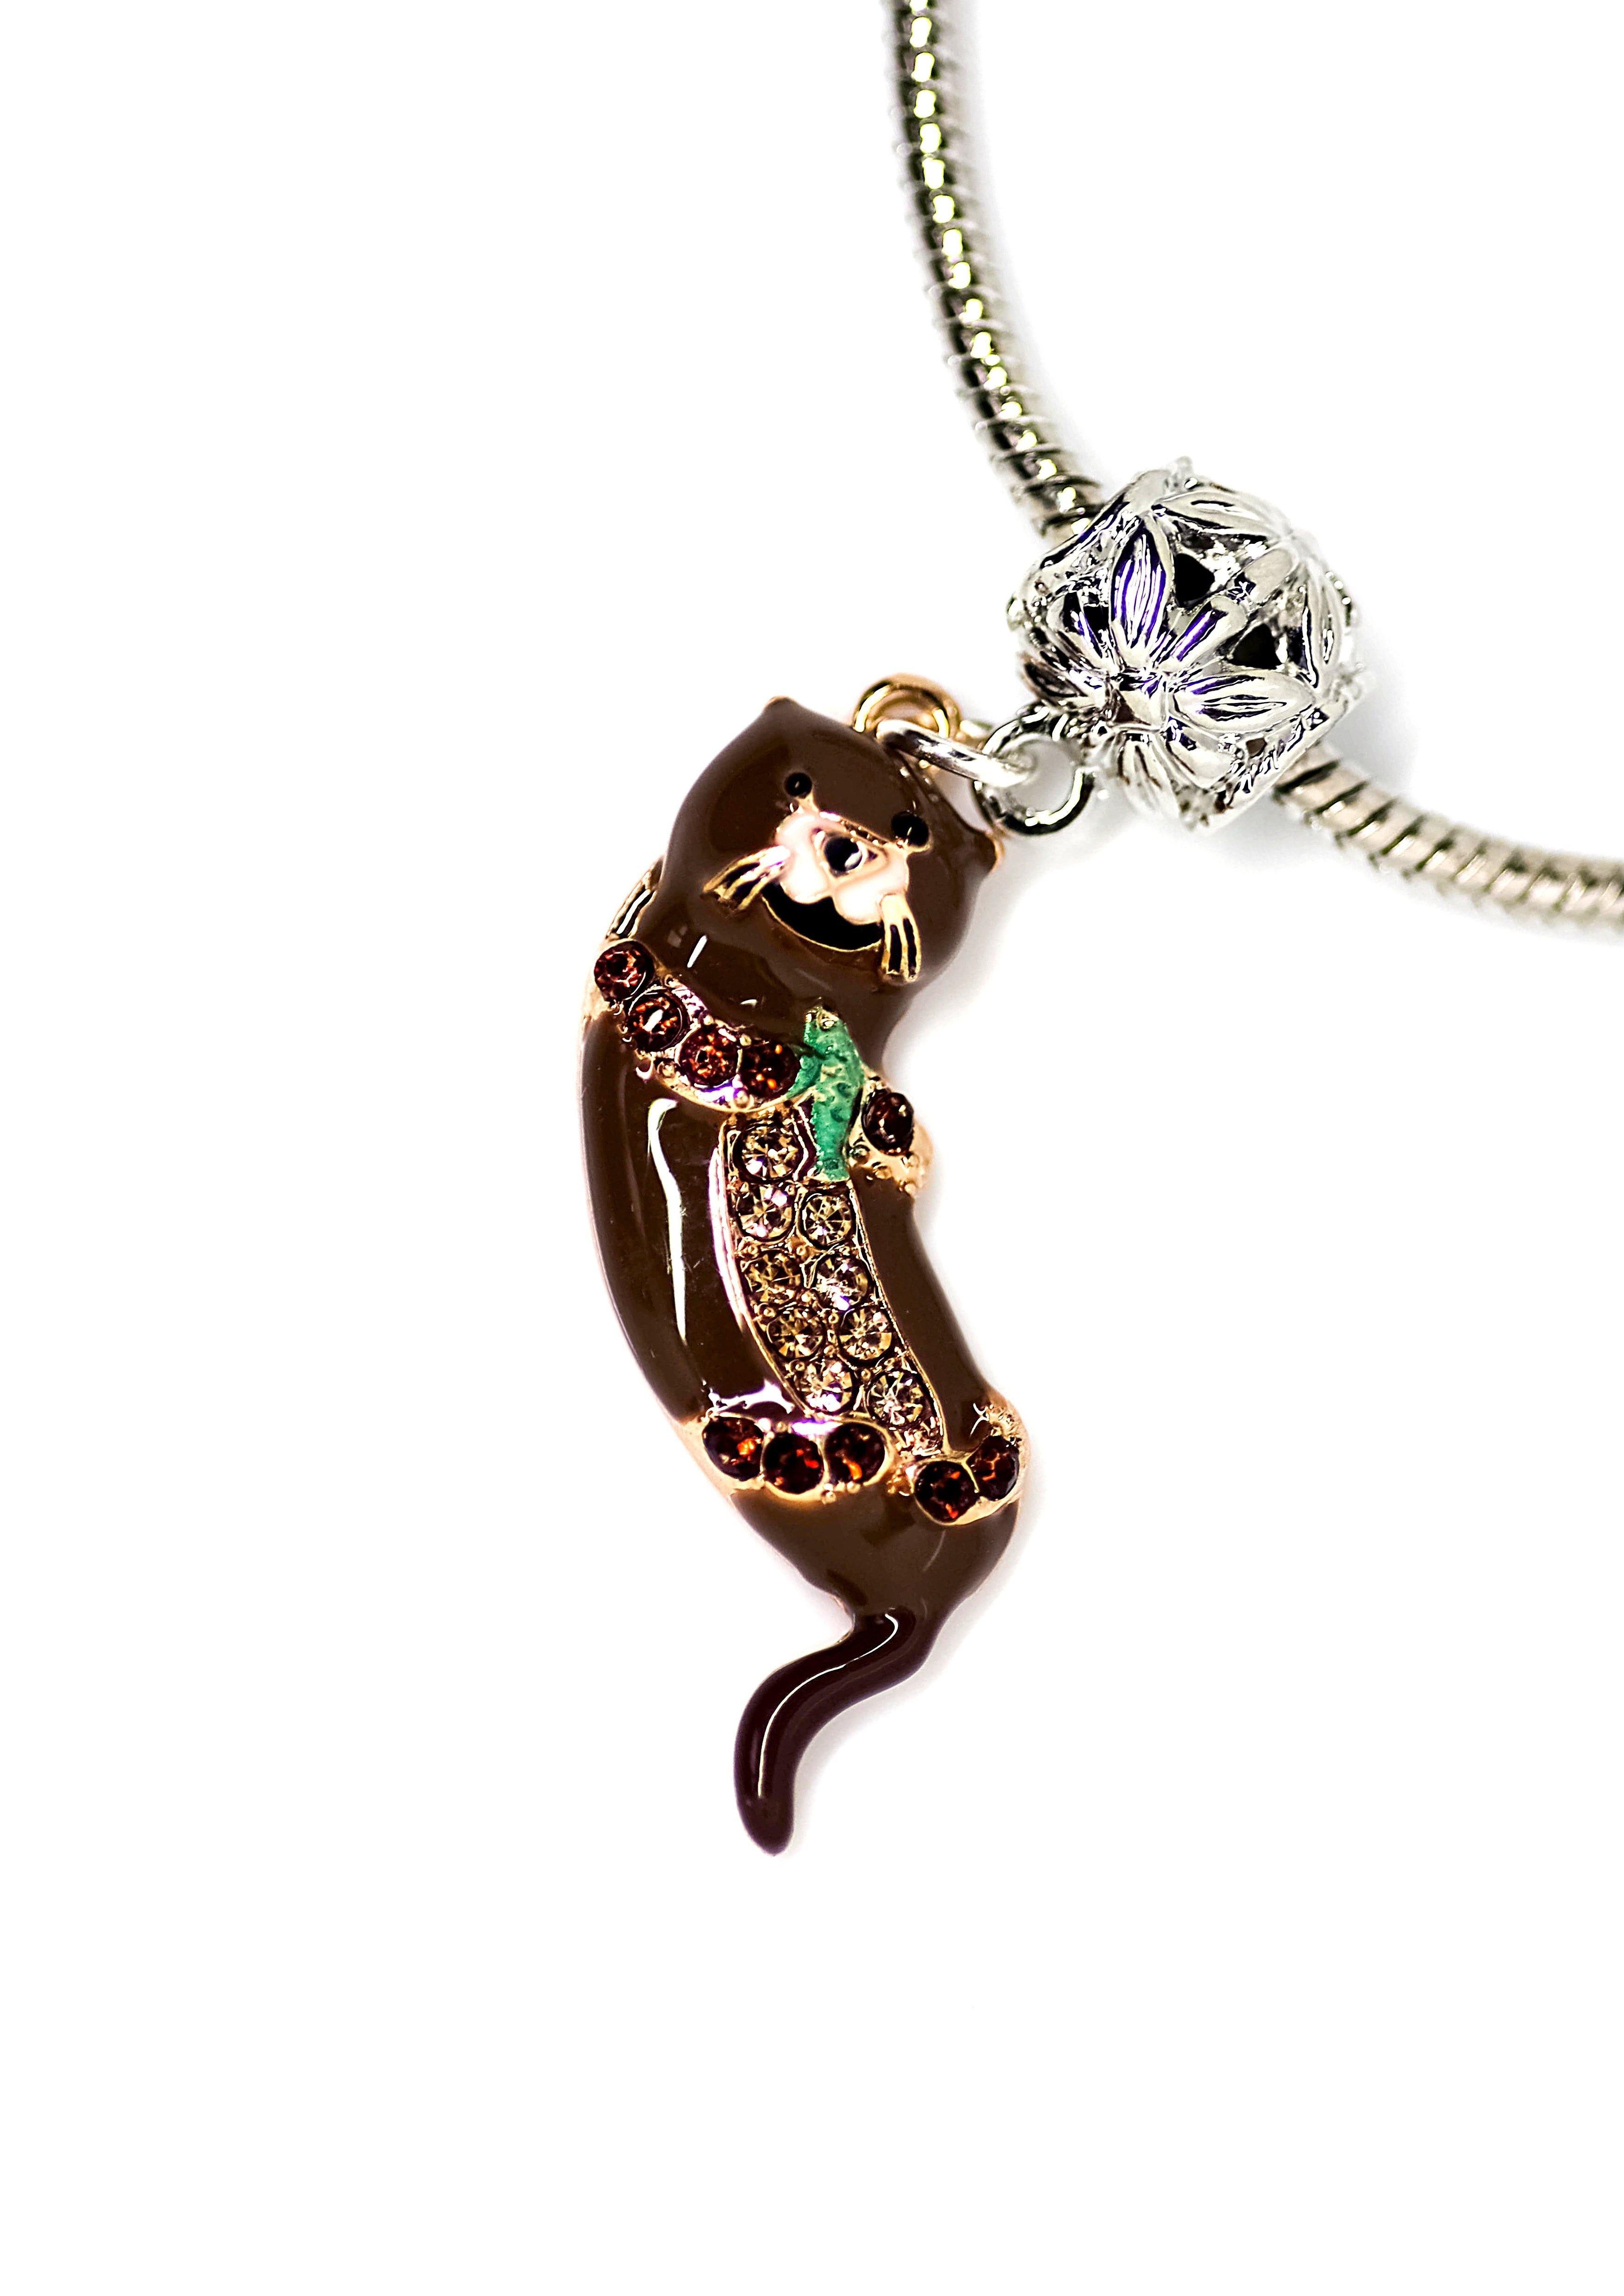 Otter Charm Bracelet - Wildtouch - Wildtouch